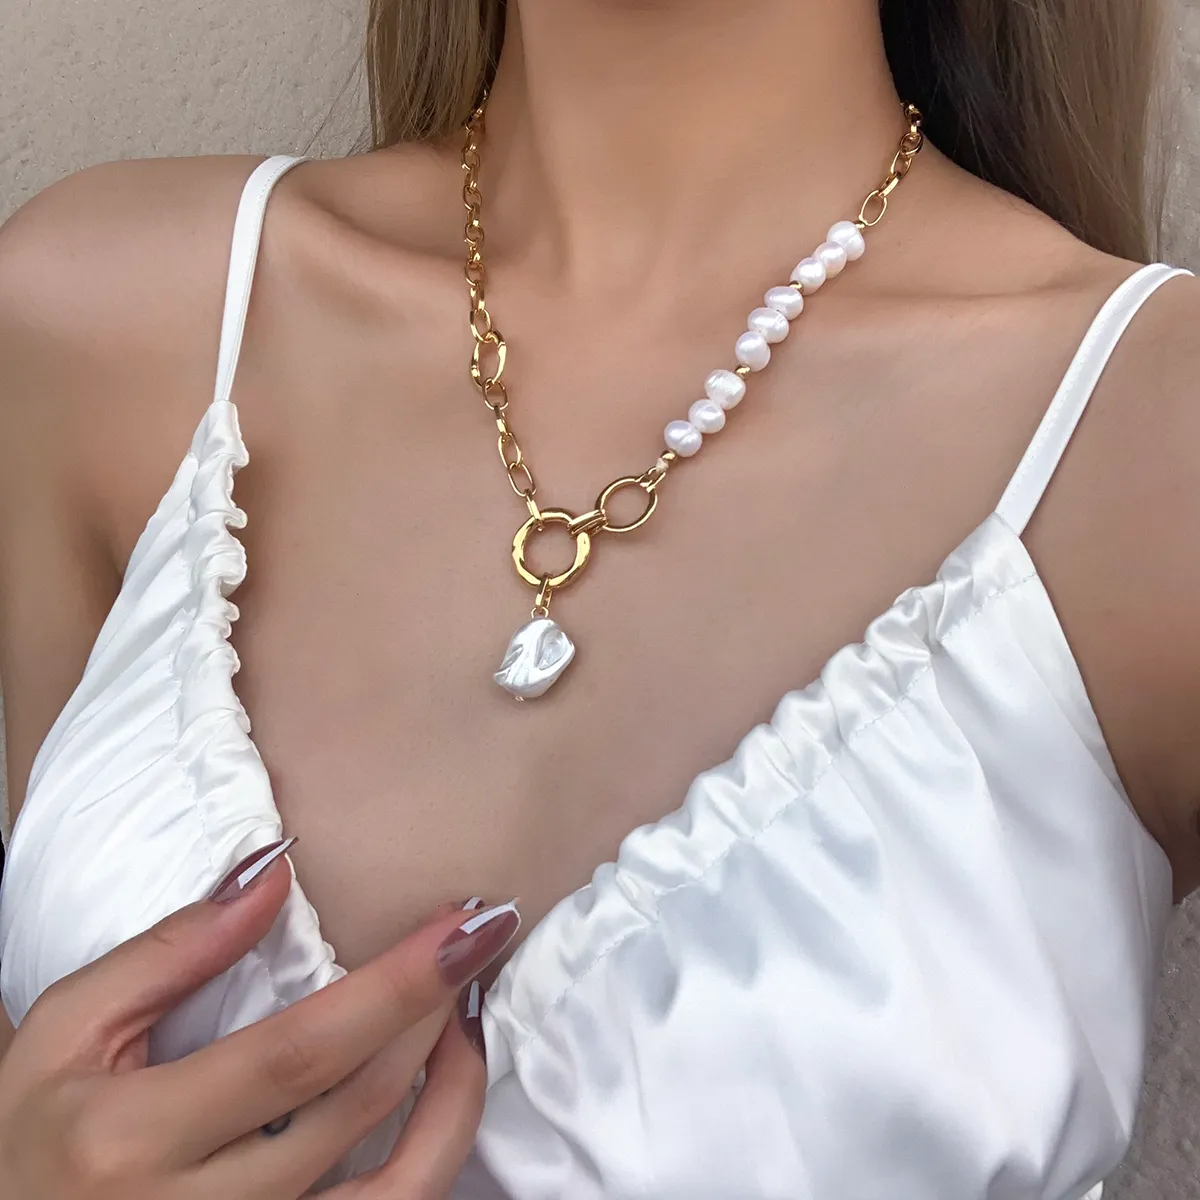 Flashbuy Irregular Natural Freshwater Pearl Pendant Necklaces for Women Chunky Chain Circles Baroque Pearl Necklace Elegant